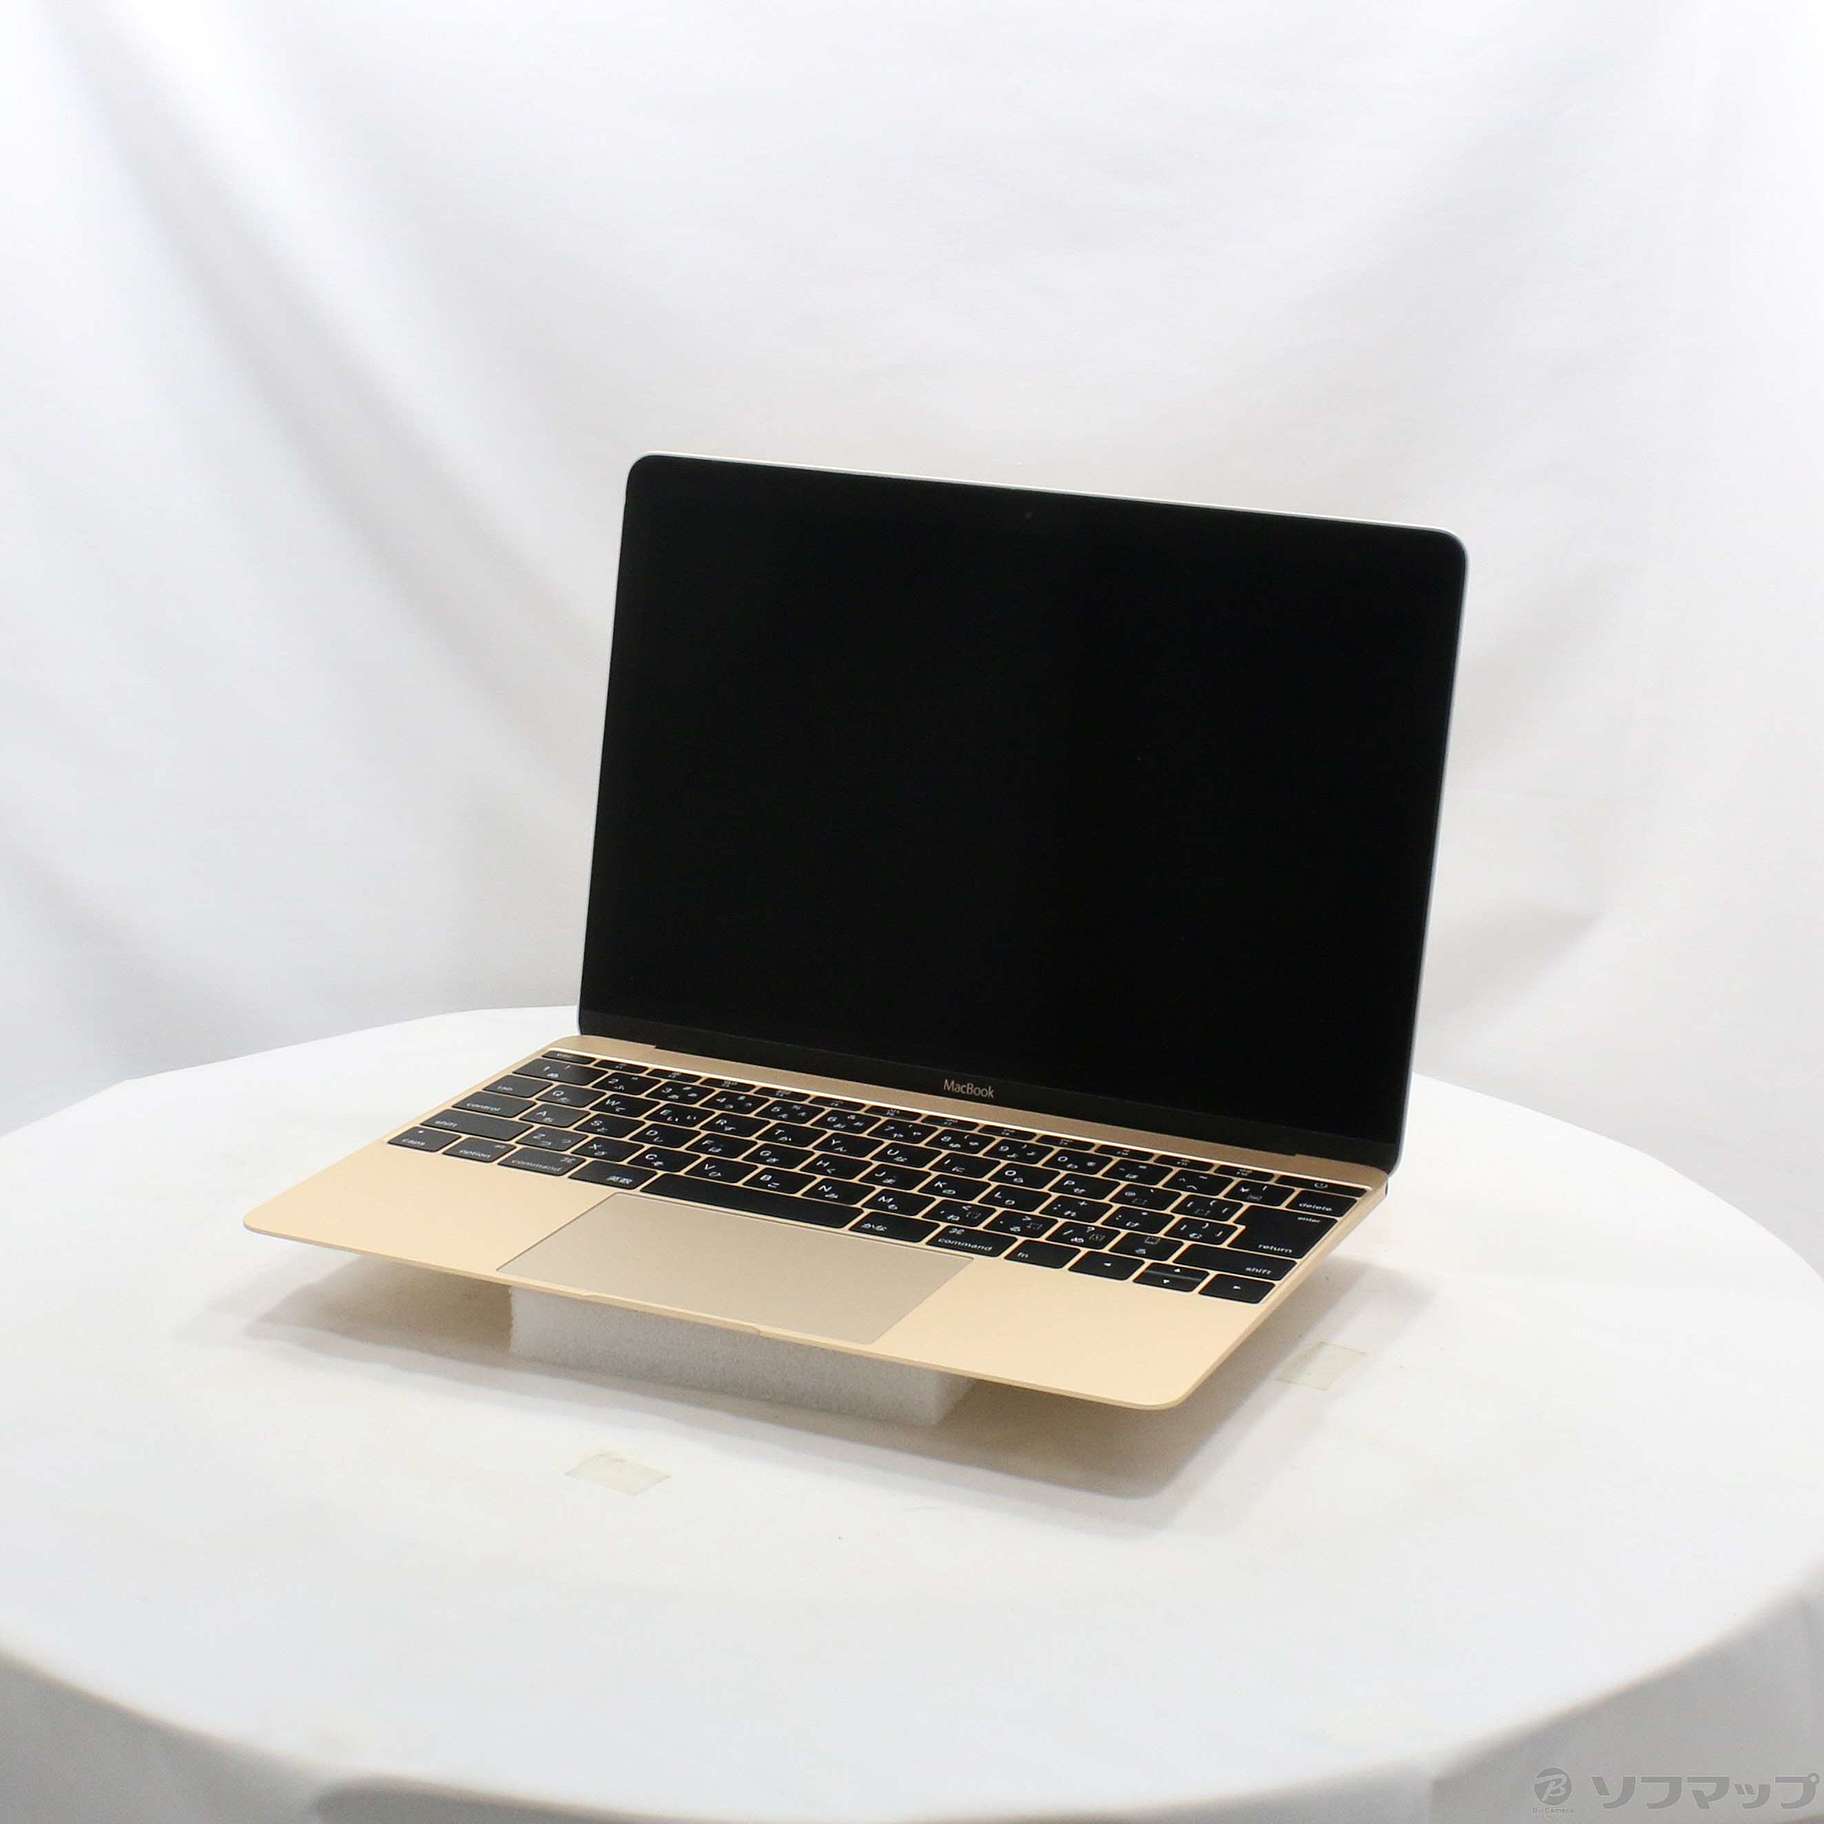 Macbook Early 2015 12inch